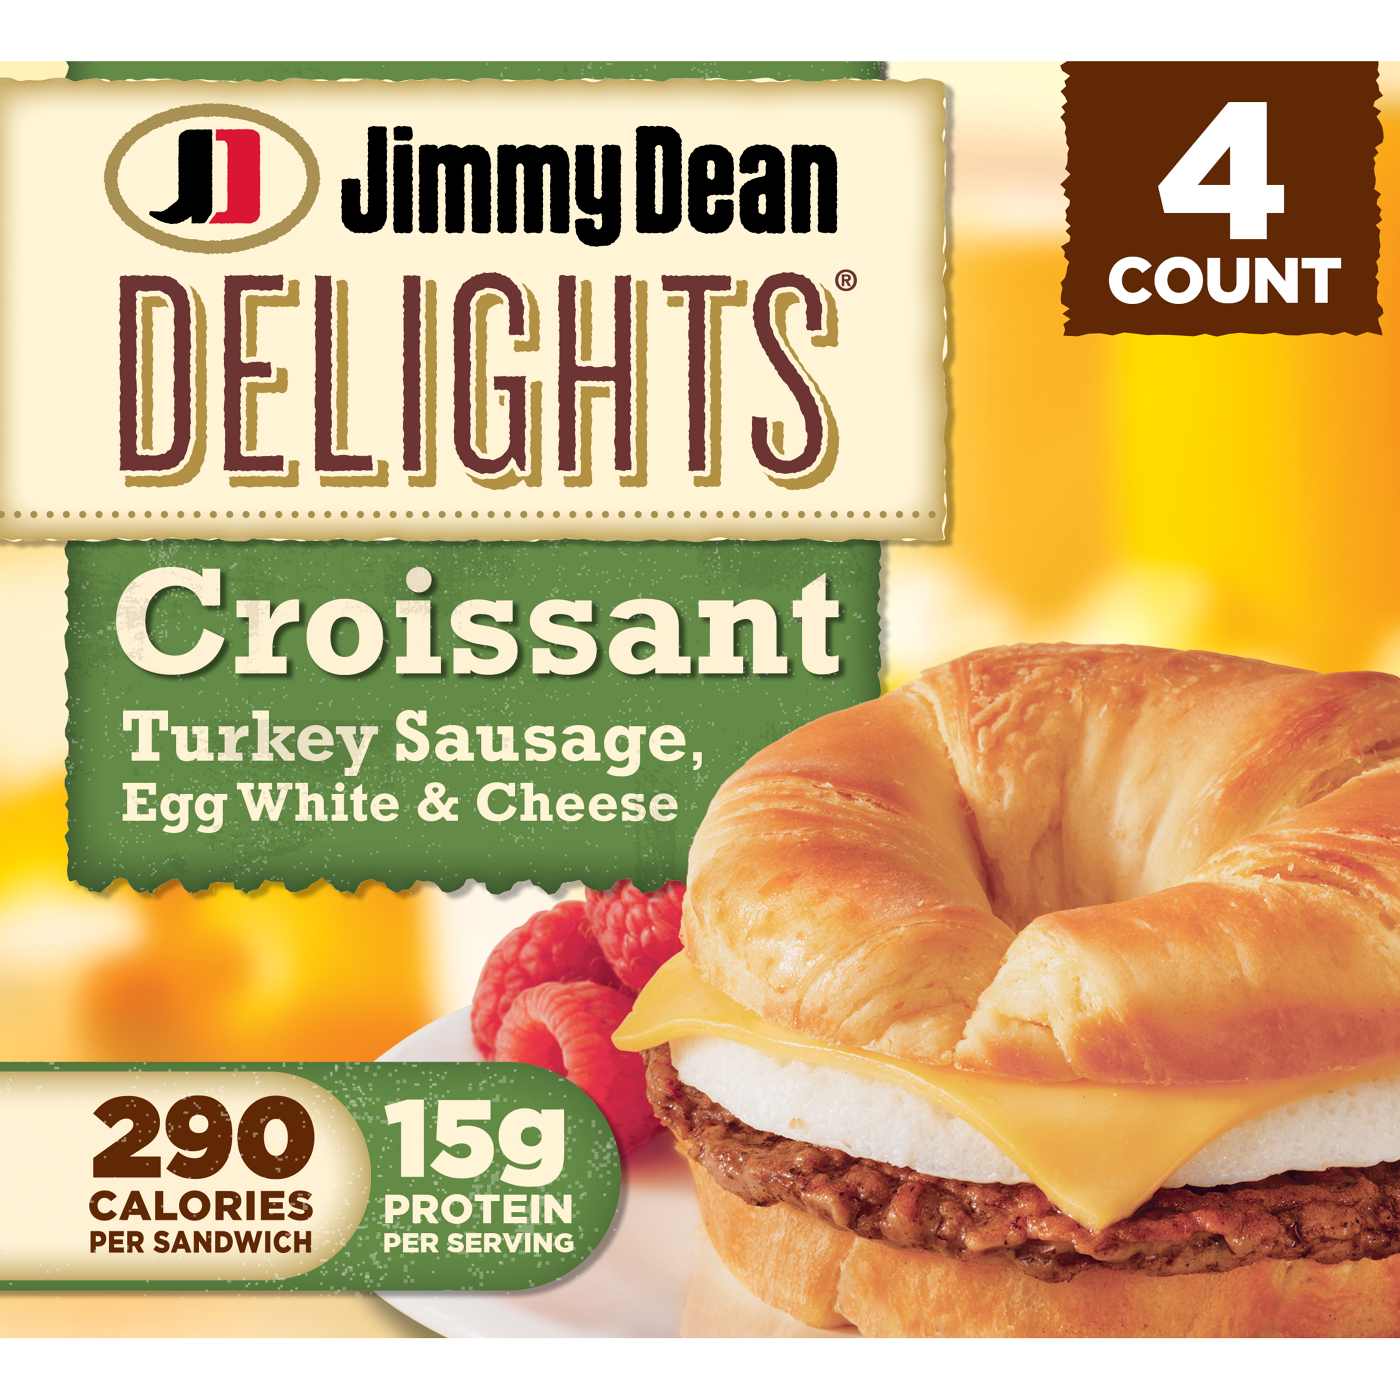 Jimmy Dean Delights Turkey Sausage, Egg White & Cheese Croissant Sandwiches; image 1 of 3